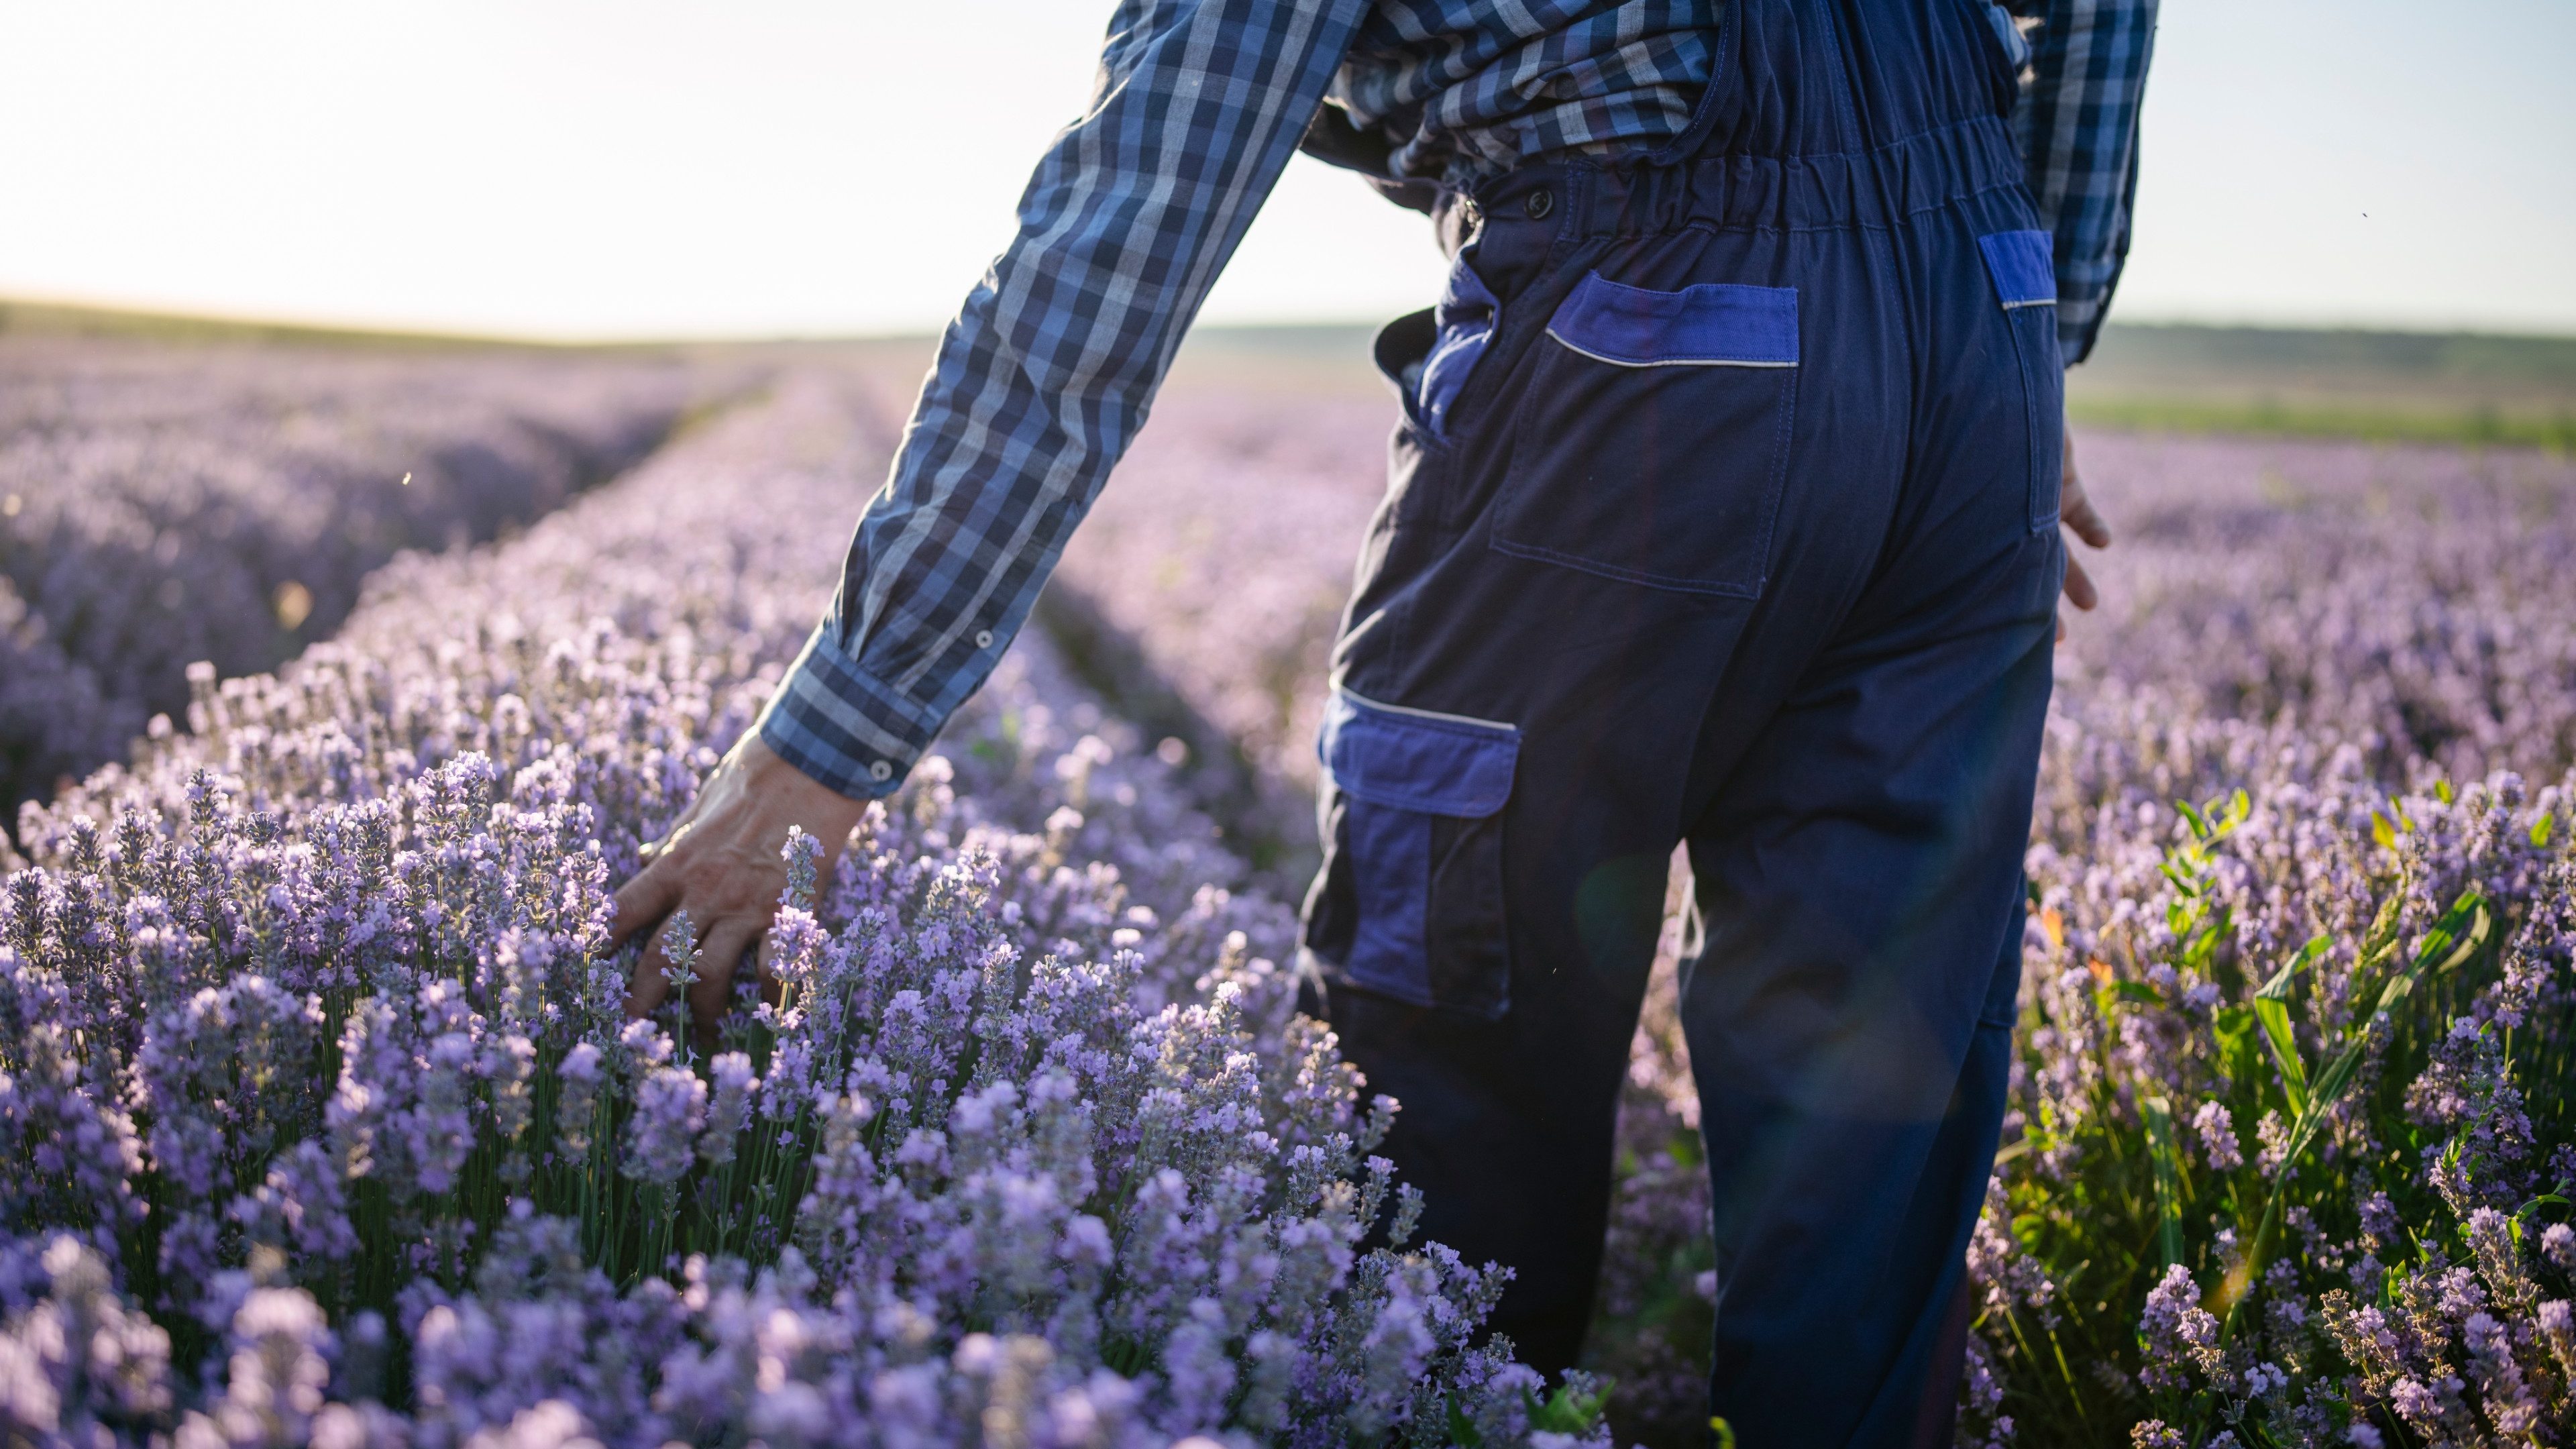 Rear view of senior farmer walking in field and enjoyment on his lavender agriculture fields at sunset.